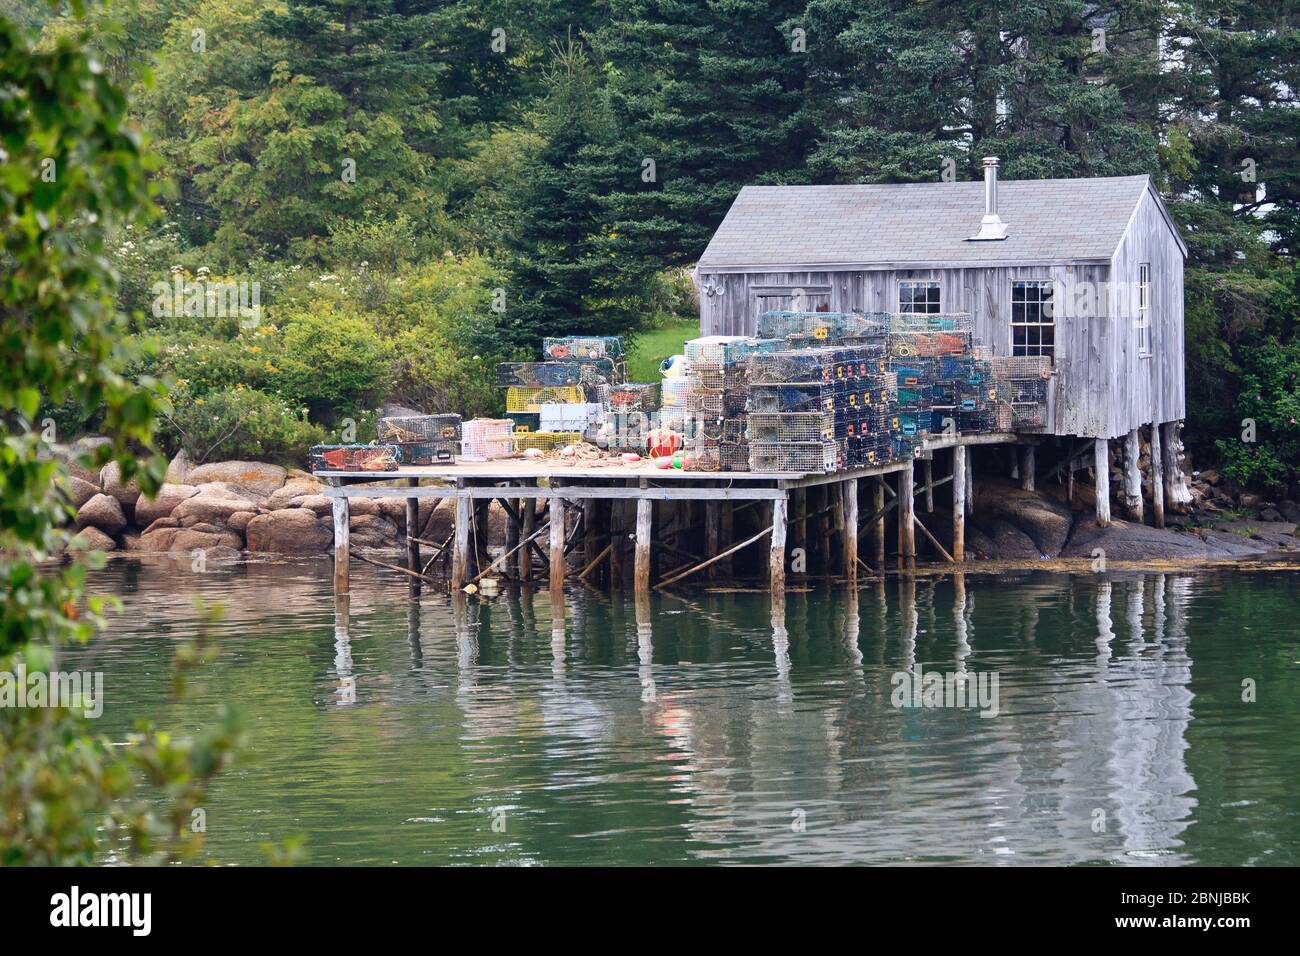 Boathouse and lobster traps, Maine, New England, United States of America, North America Stock Photo